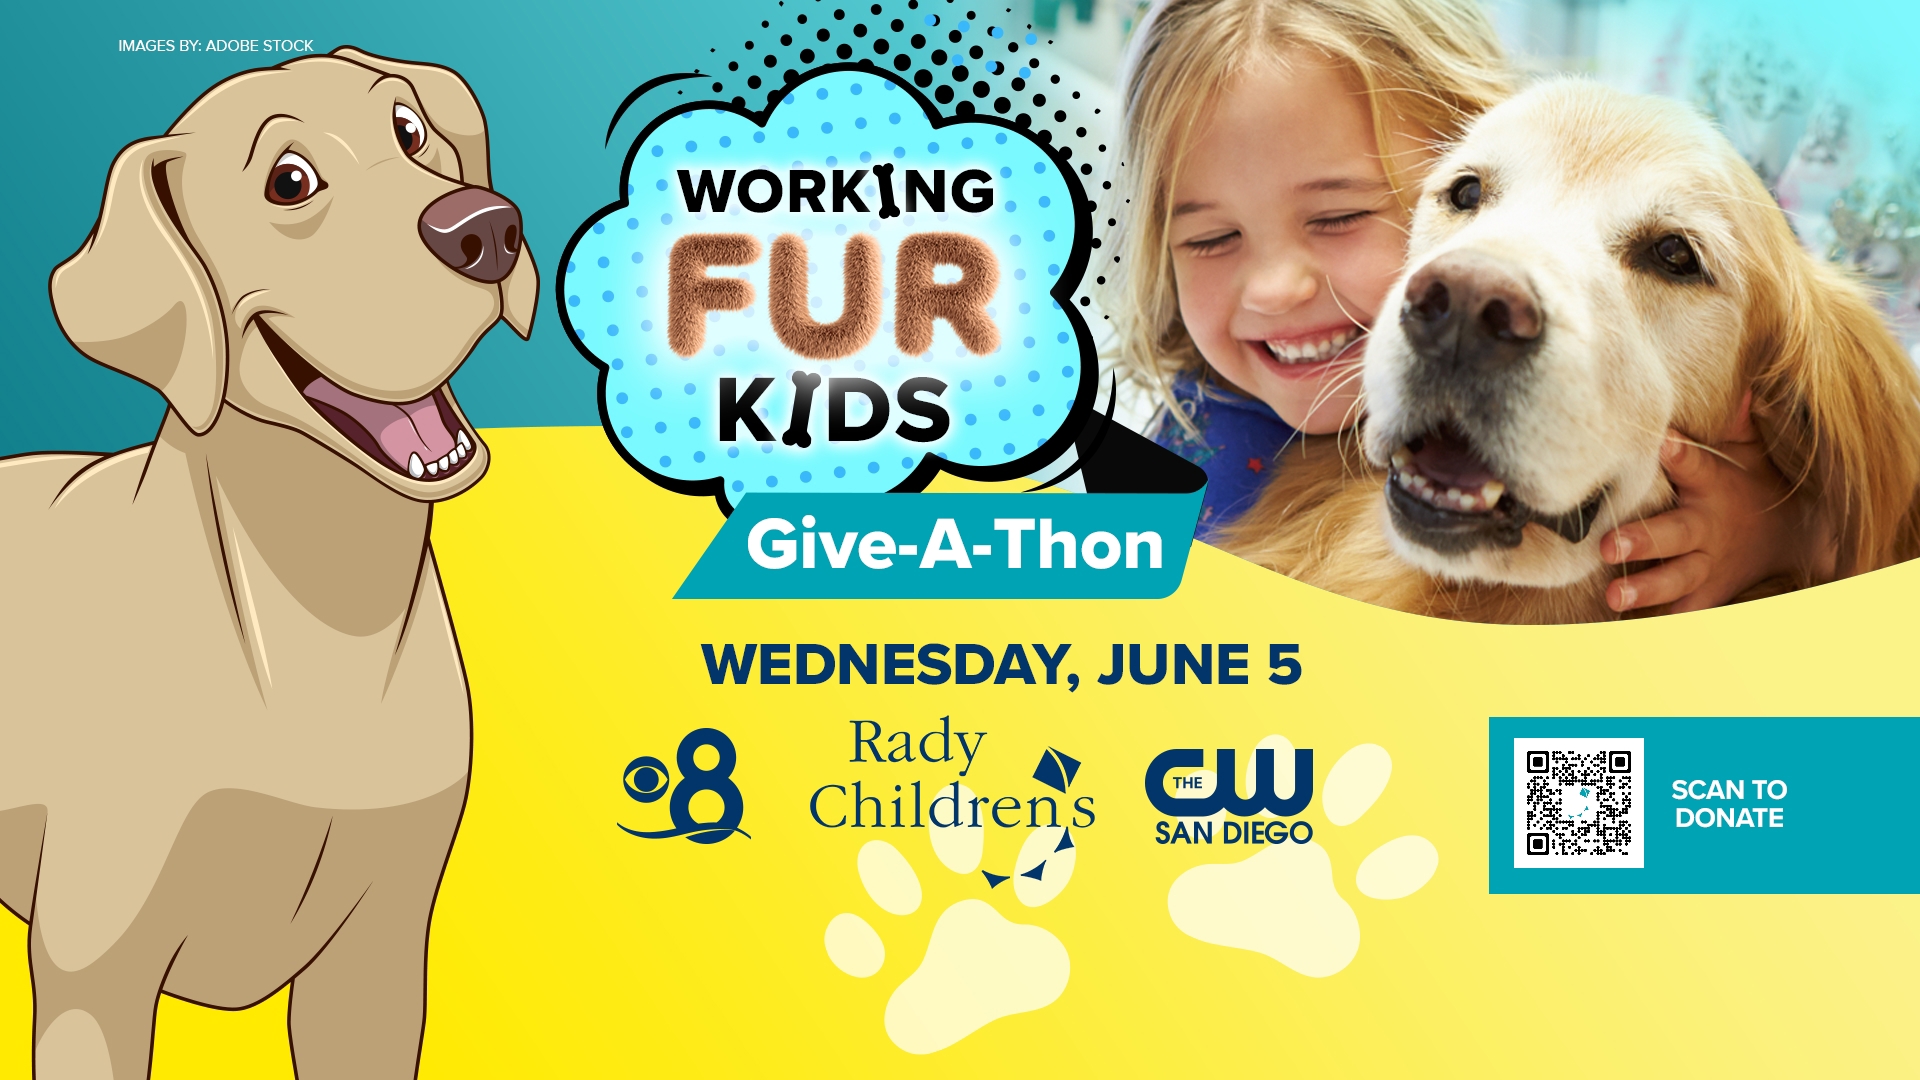 CBS 8 is Working FUR Kids to help Rady Children’s Hospital. Monday, donations will be matched up to $10,000 by The Black Pearl’s Monster Truck Sponsor, StrutCares.